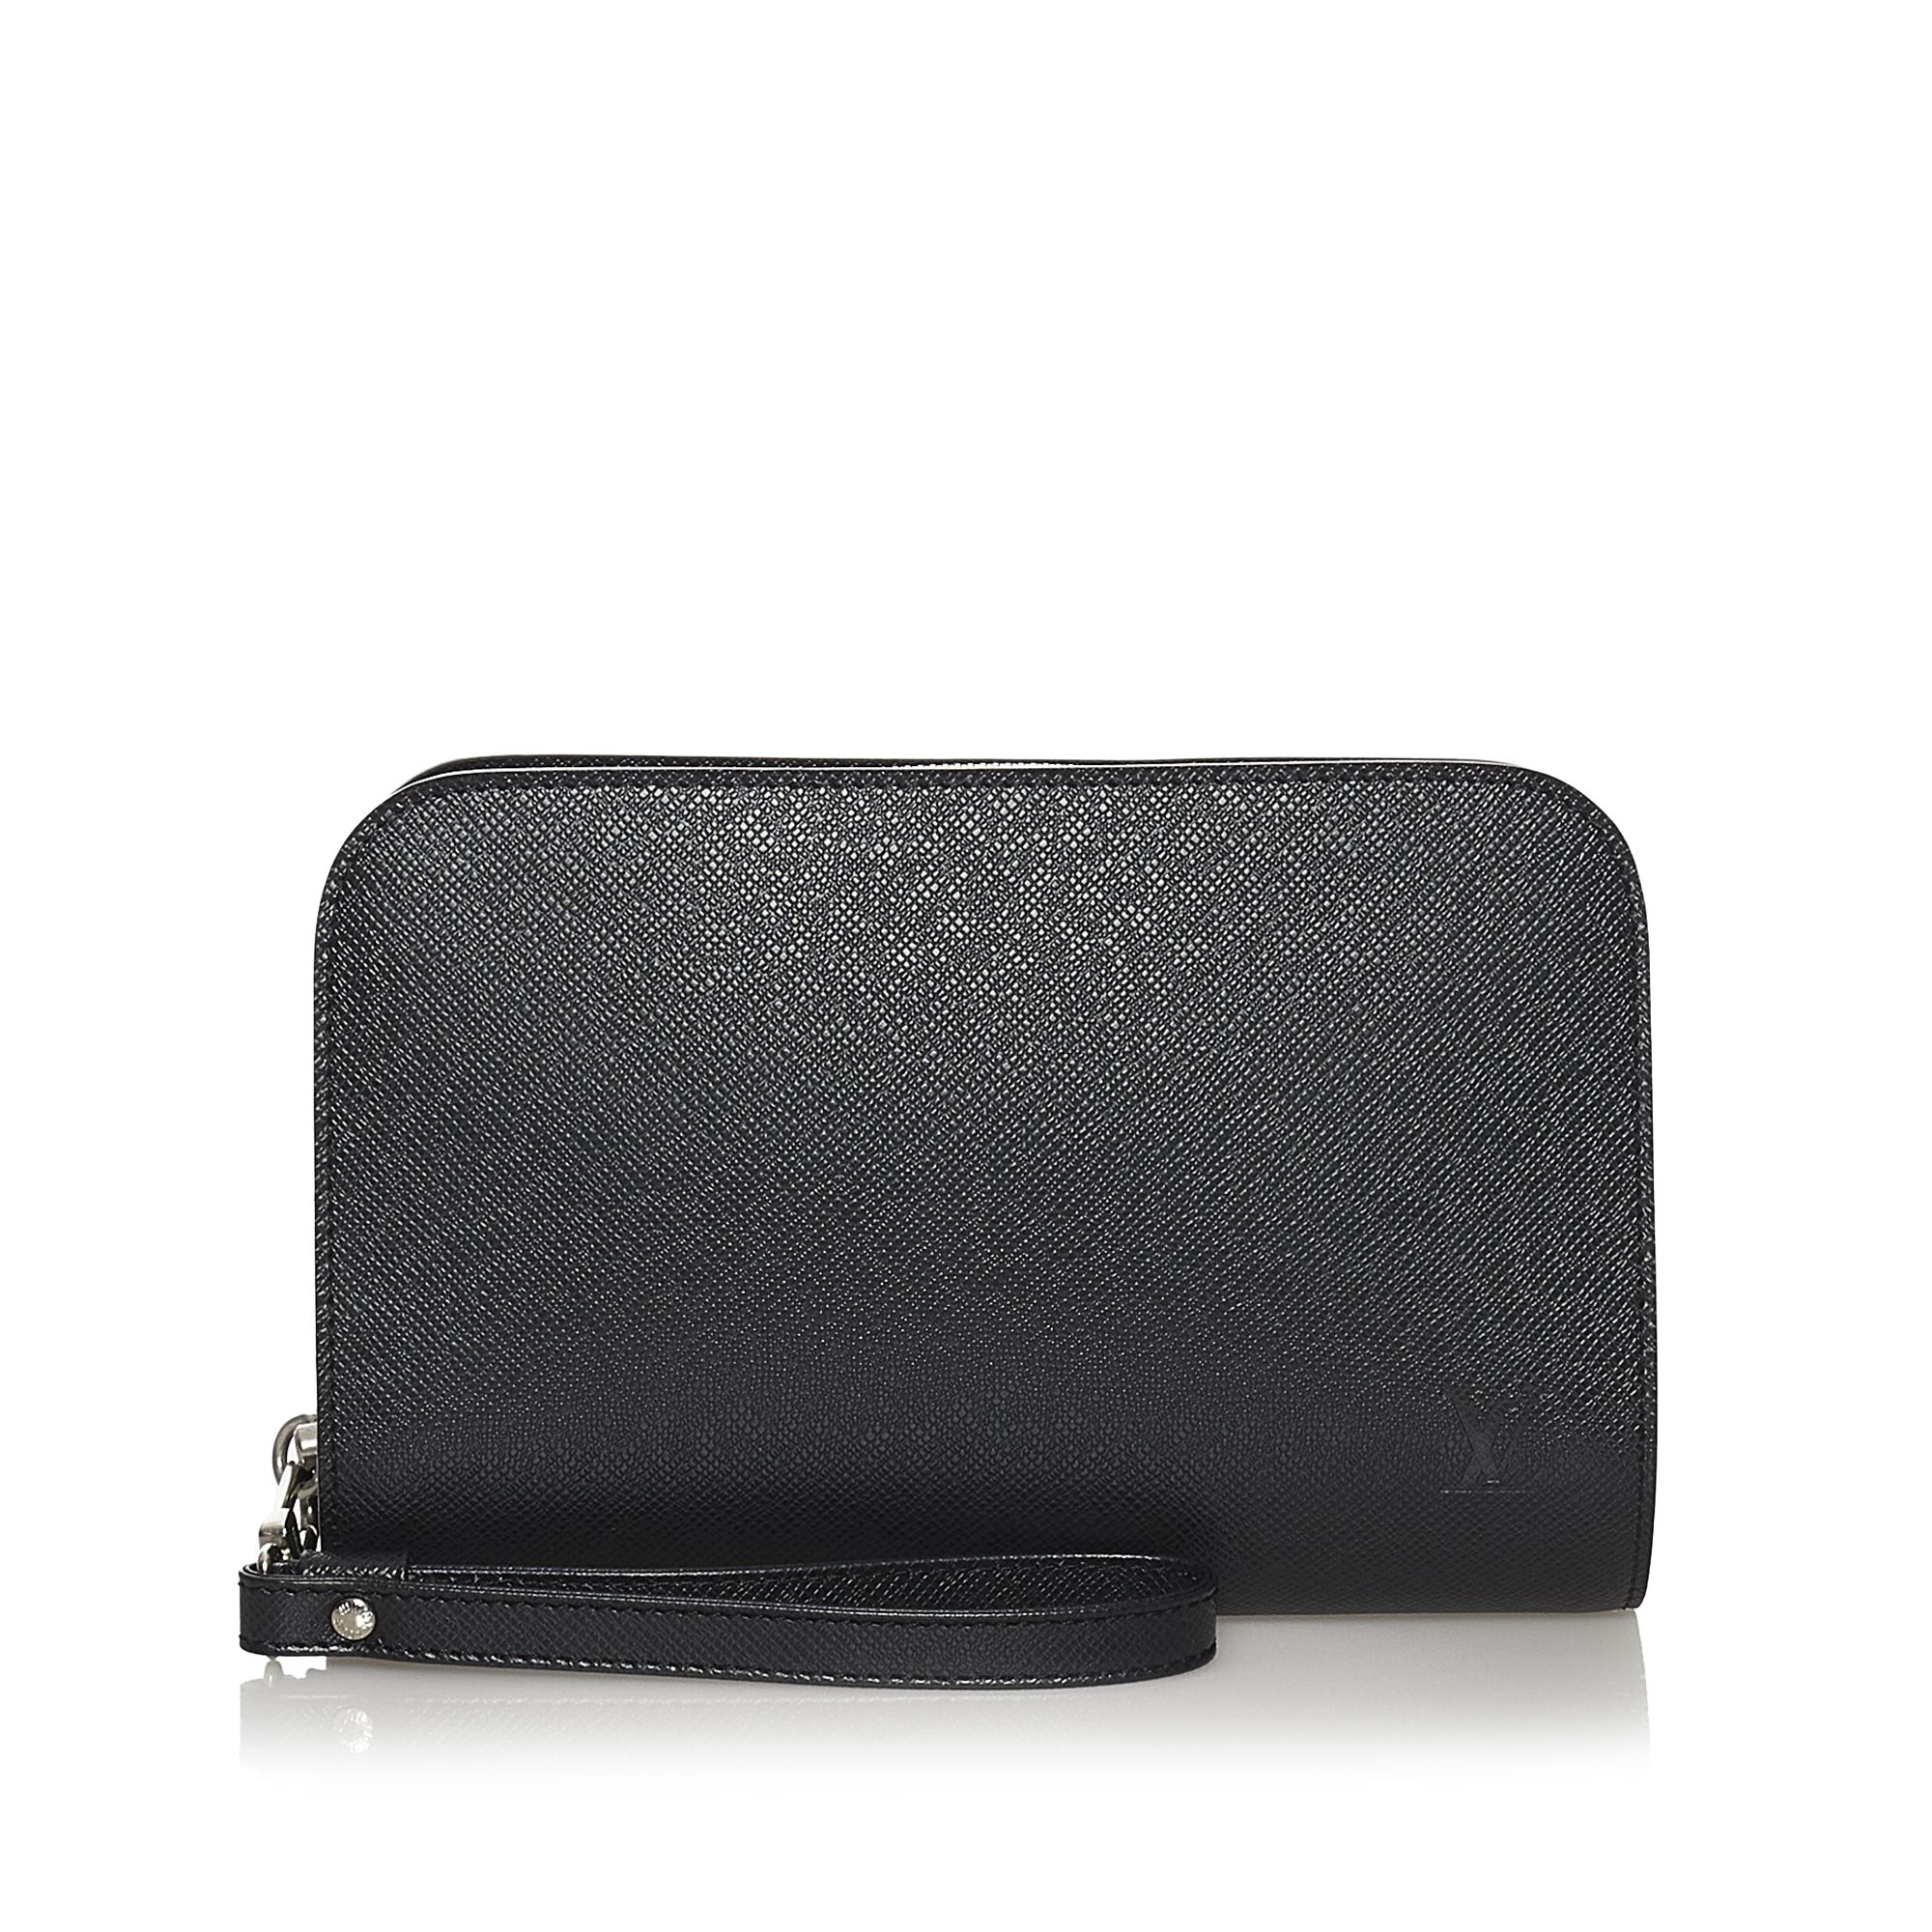 VINTAGE. RRP AS NEW. The Baikal clutch features a taiga leather body, a flat wrist strap, an exterior slip pocket, a zip around closure, and an interior slip pocket.Zipper is scratched.

Dimensions:
Length 16cm
Width 13.5cm
Depth 5cm

Original Accessories: Dust Bag

Serial Number: RI2194
Color: Black
Material: Leather x Taiga Leather
Country of Origin: France
Boutique Reference: SSU156504K1342


Product Rating: VeryGoodCondition

Certificate of Authenticity is available upon request with no extra fee required. Please contact our customer service team.